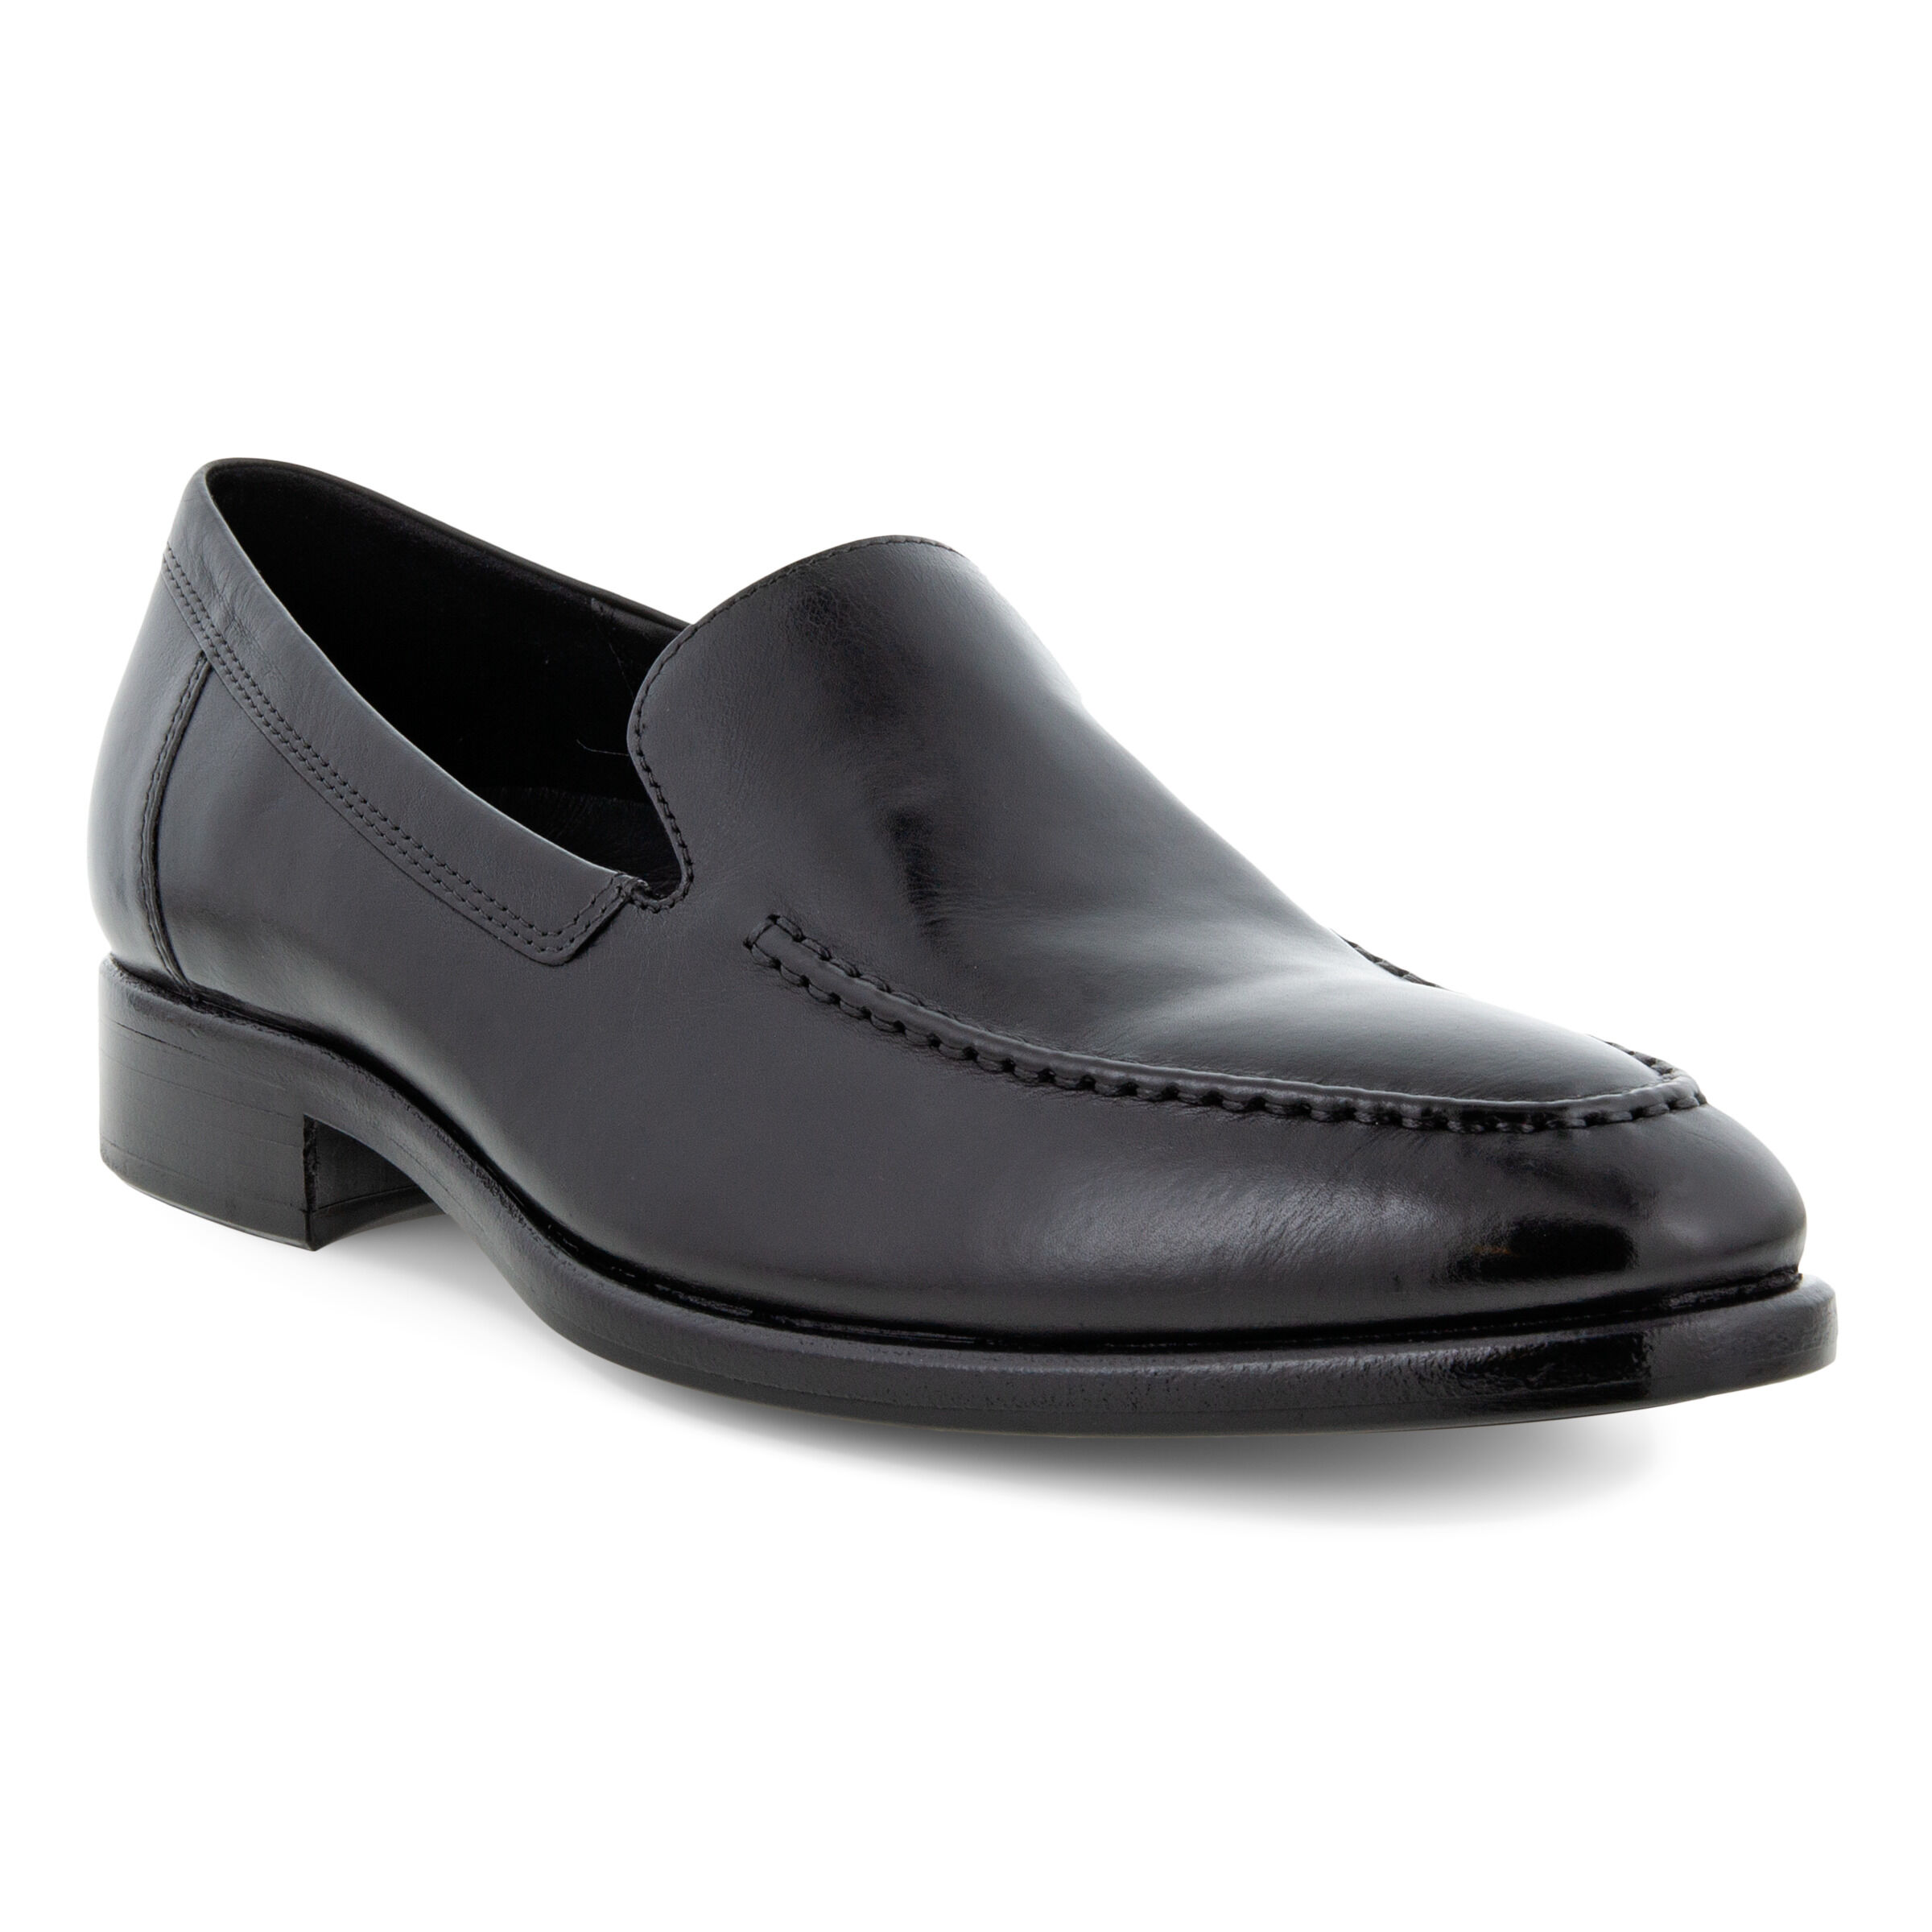 ecco formal shoes price